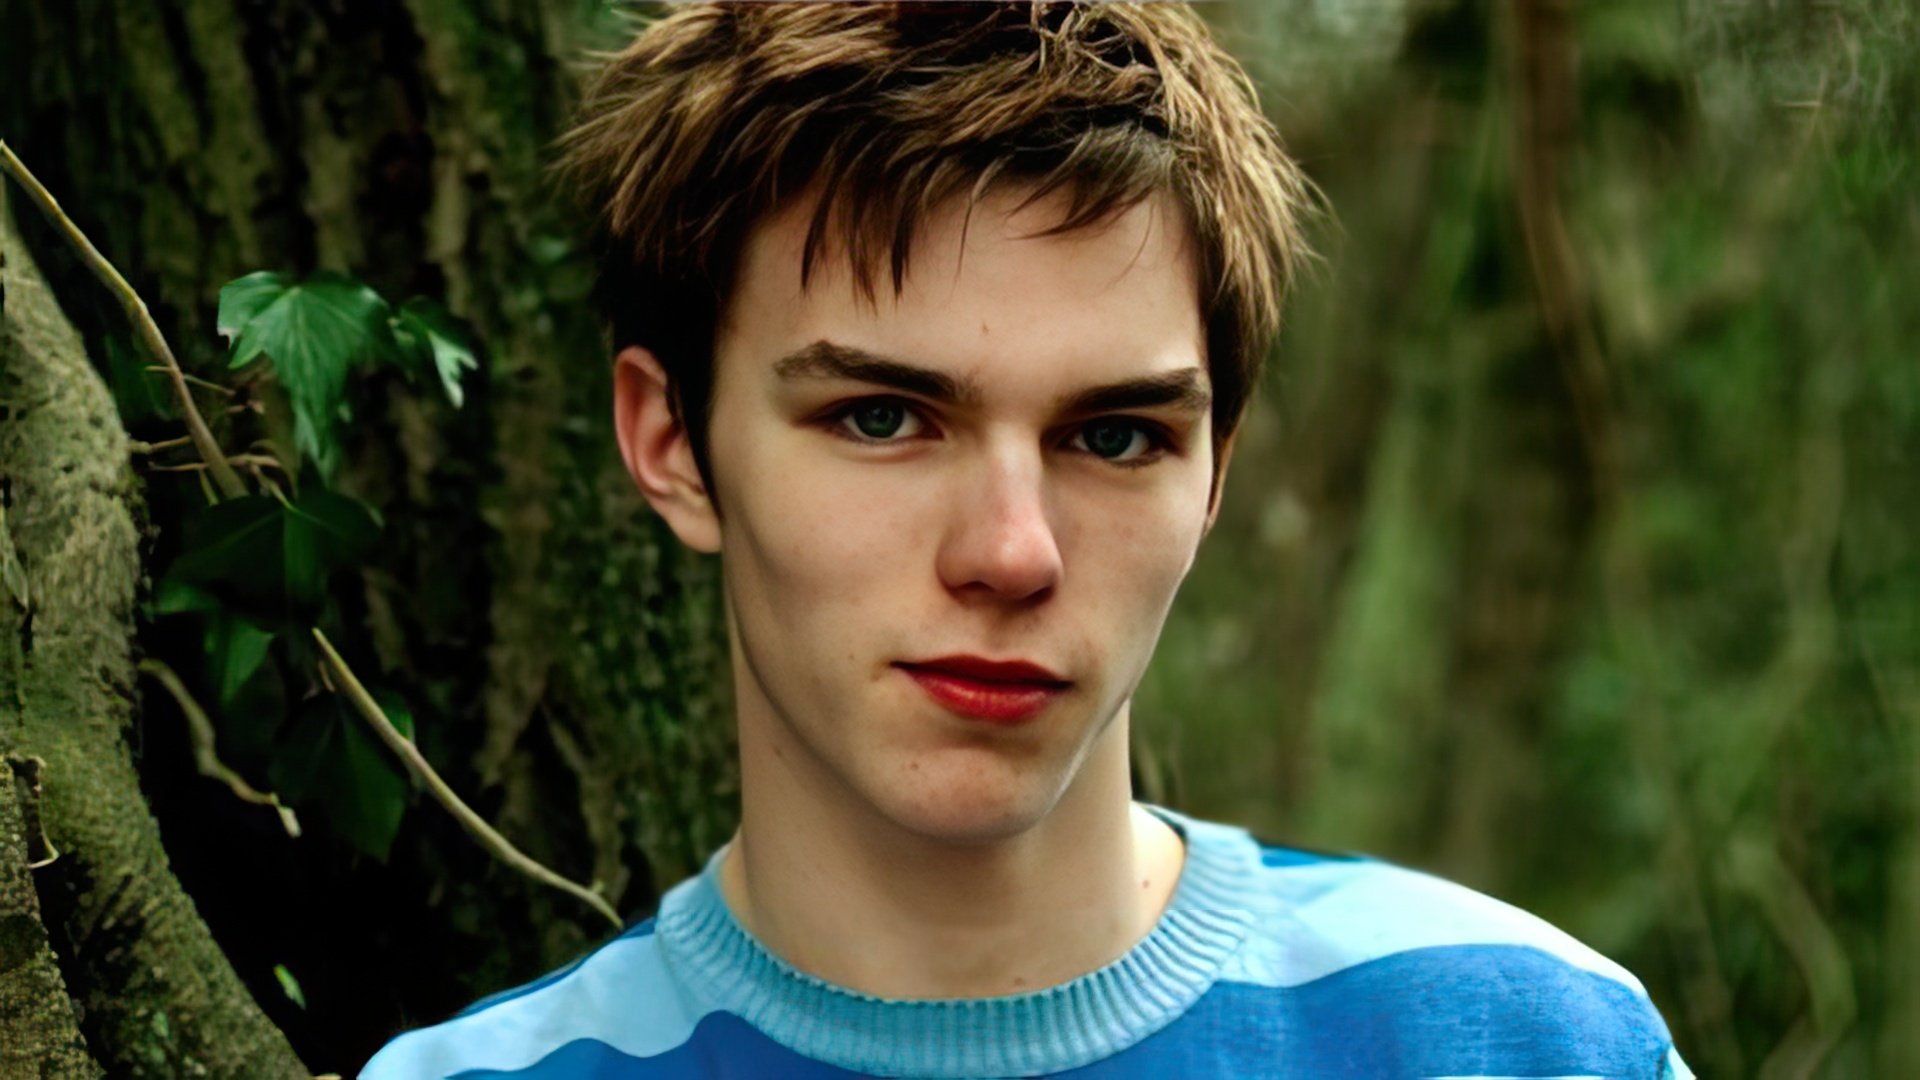 Nicholas Hoult has been appearing in movies since early childhood